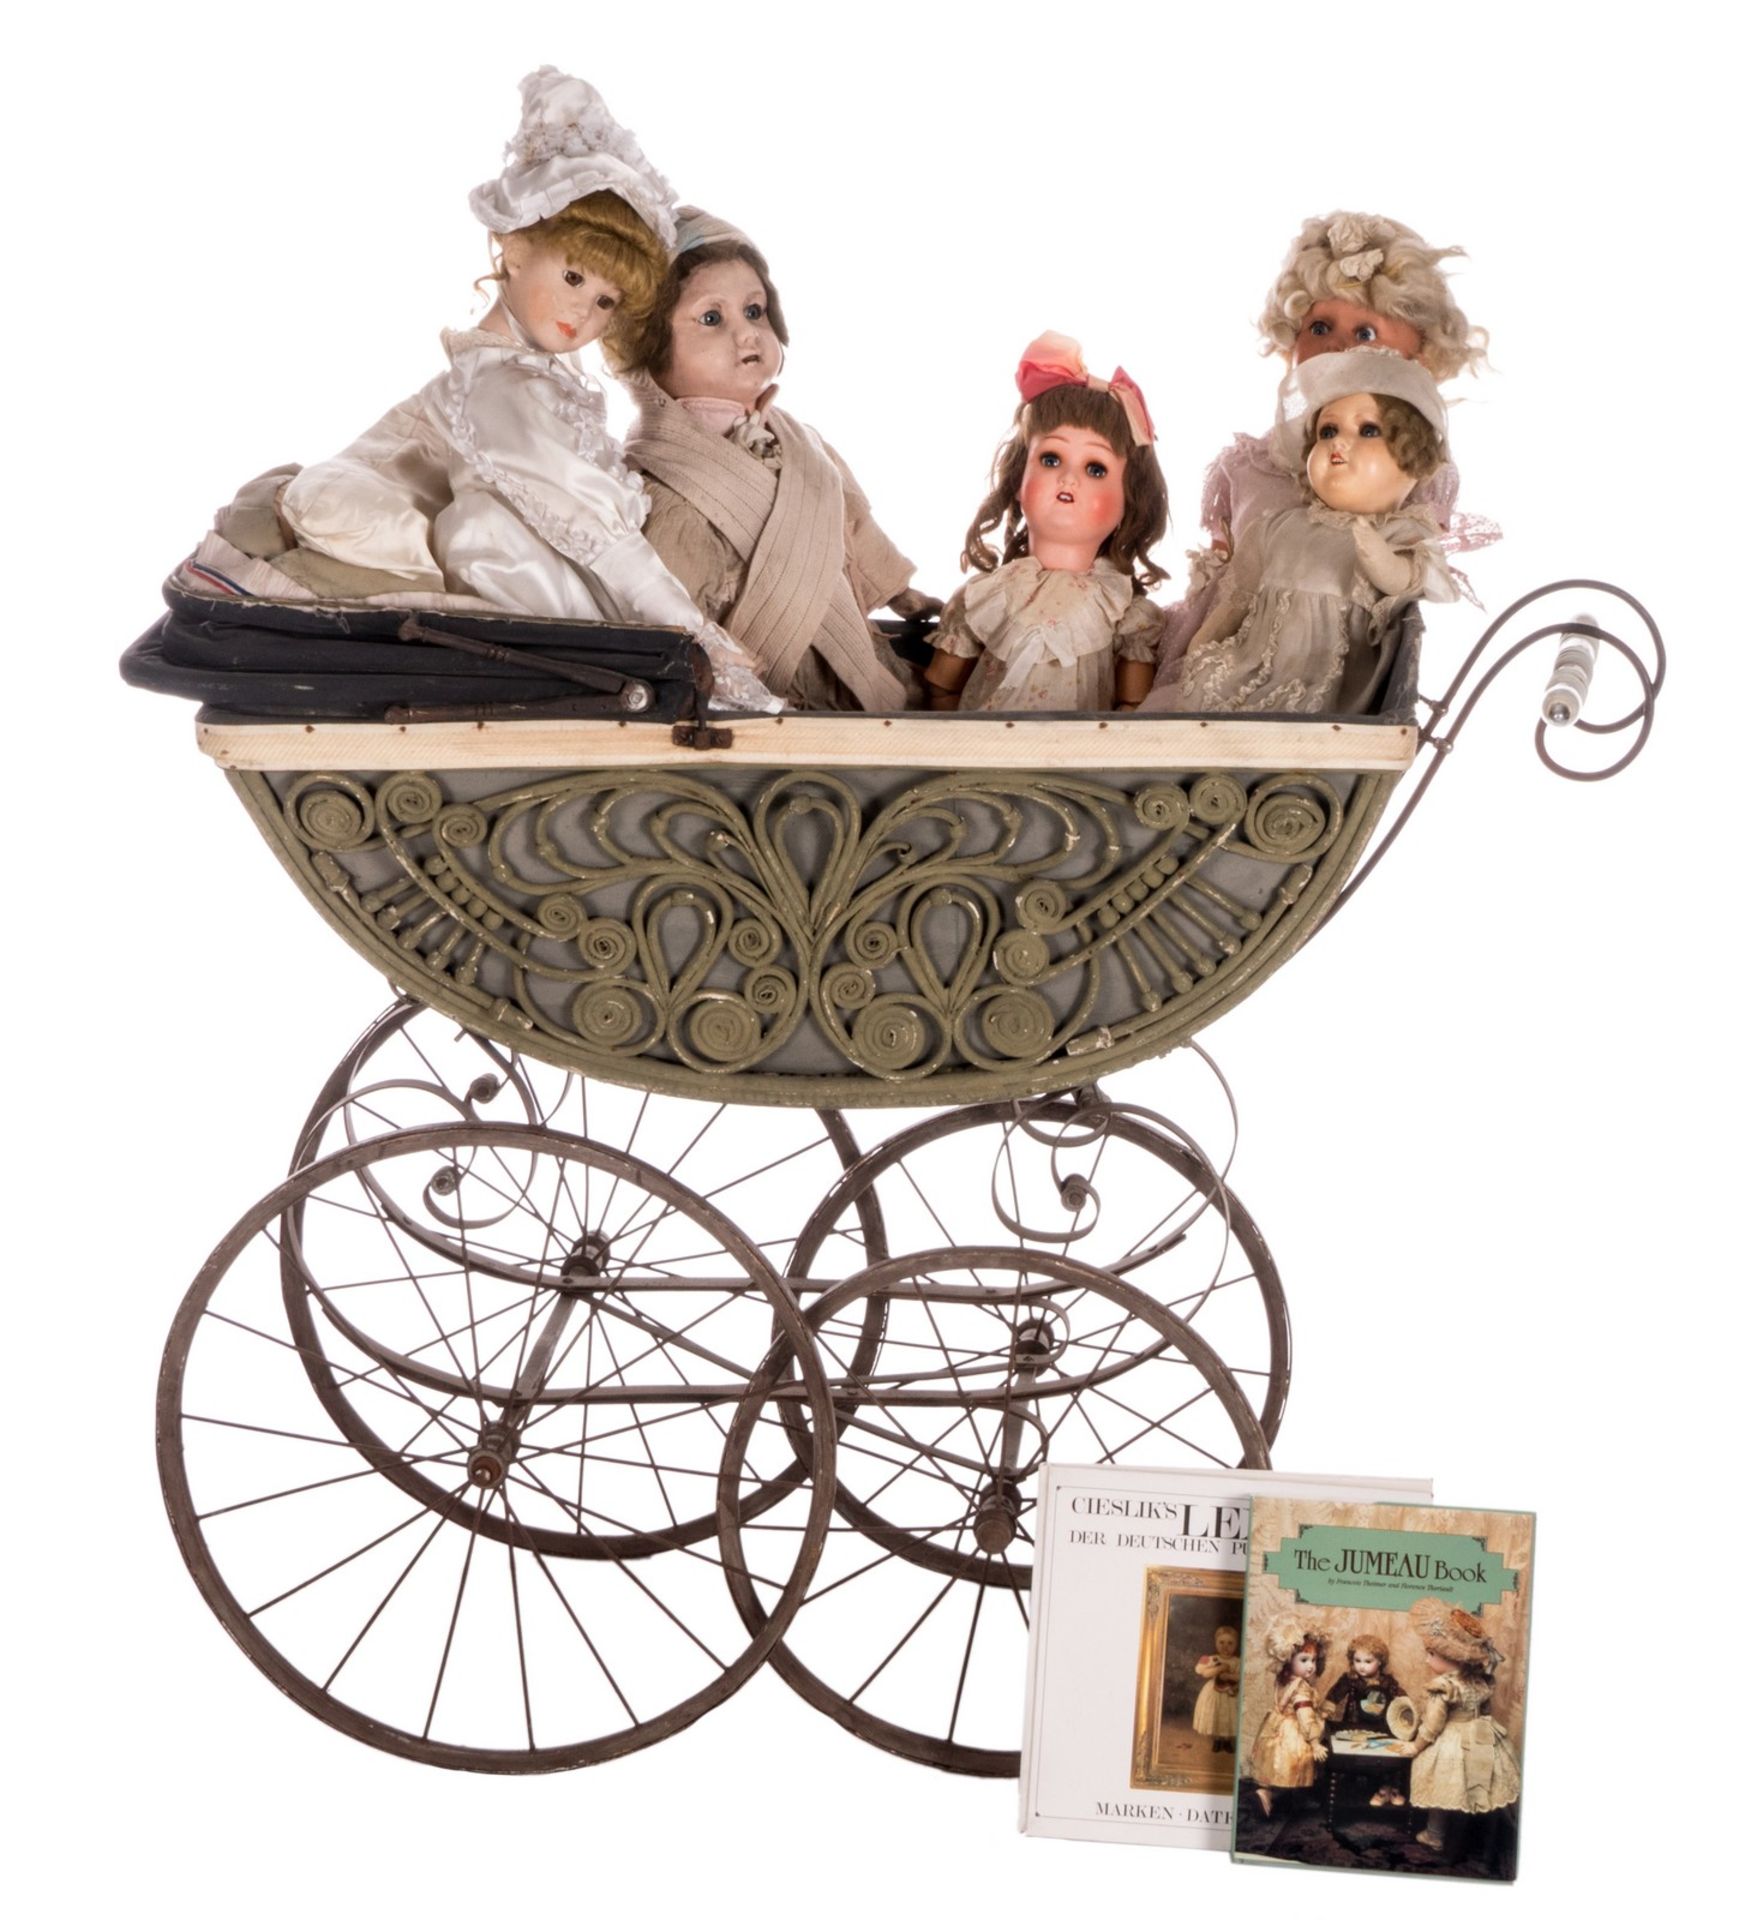 A doll carriage, about 1900, with five dolls in paper*maché, about 1960; added two books about